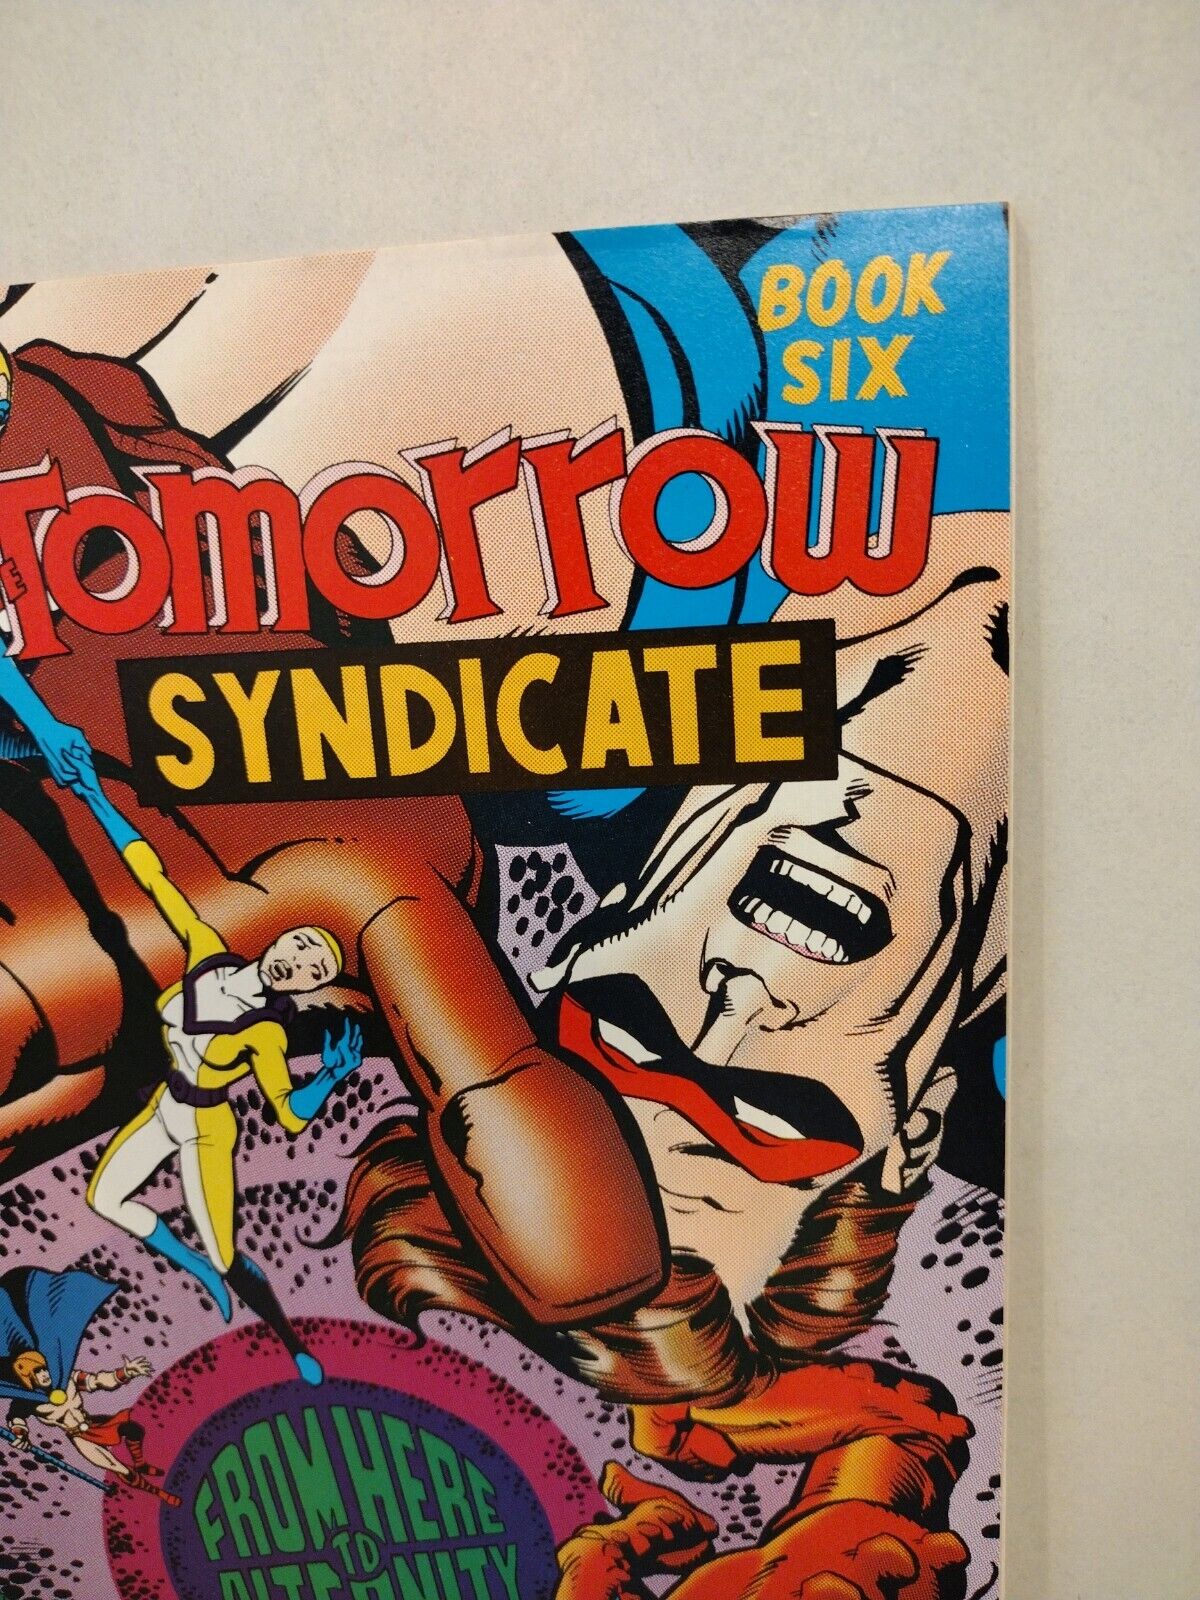 1963 Tomorrow Syndicate #6 (1993) Image Comic Alan Moore Veitch Last Issue NM